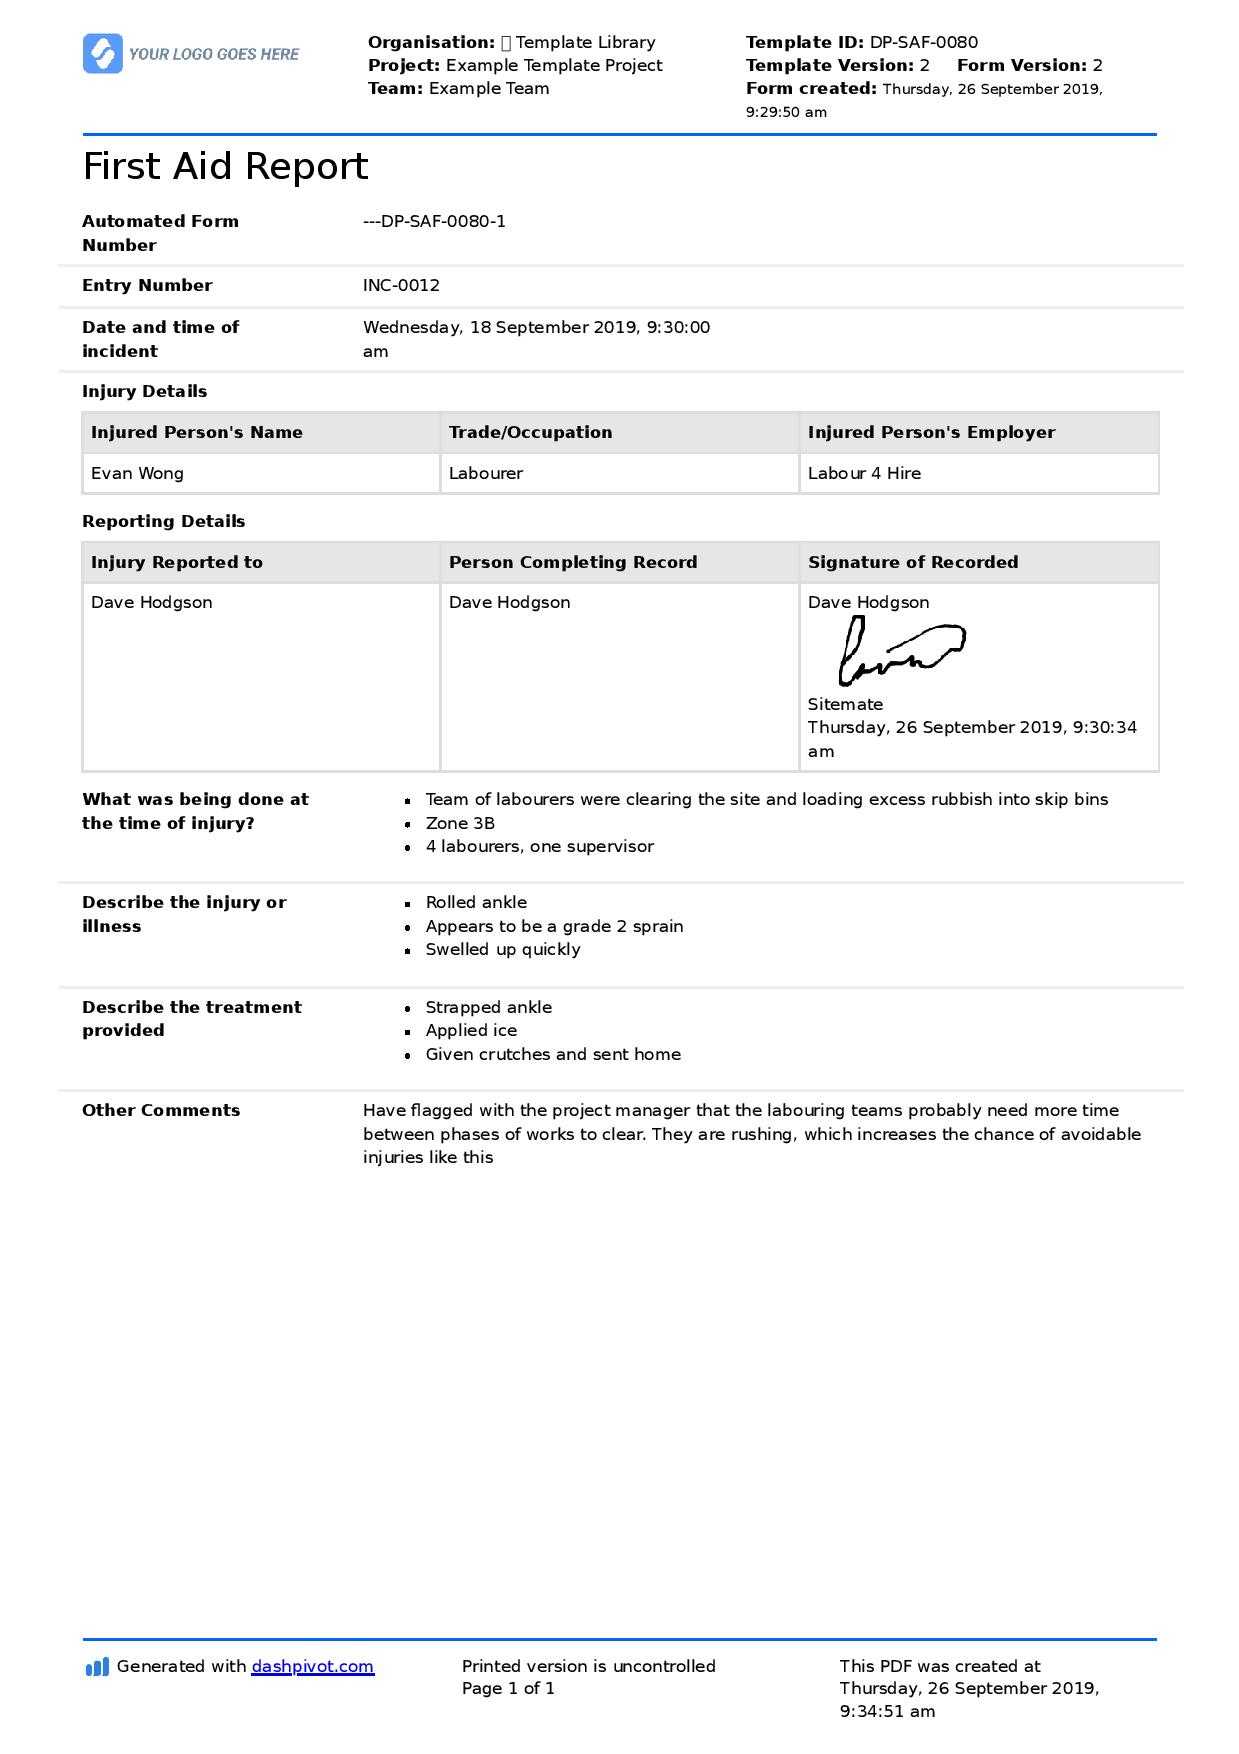 First Aid Report Form Template (Free To Use, Better Than Pdf) Inside First Aid Incident Report Form Template